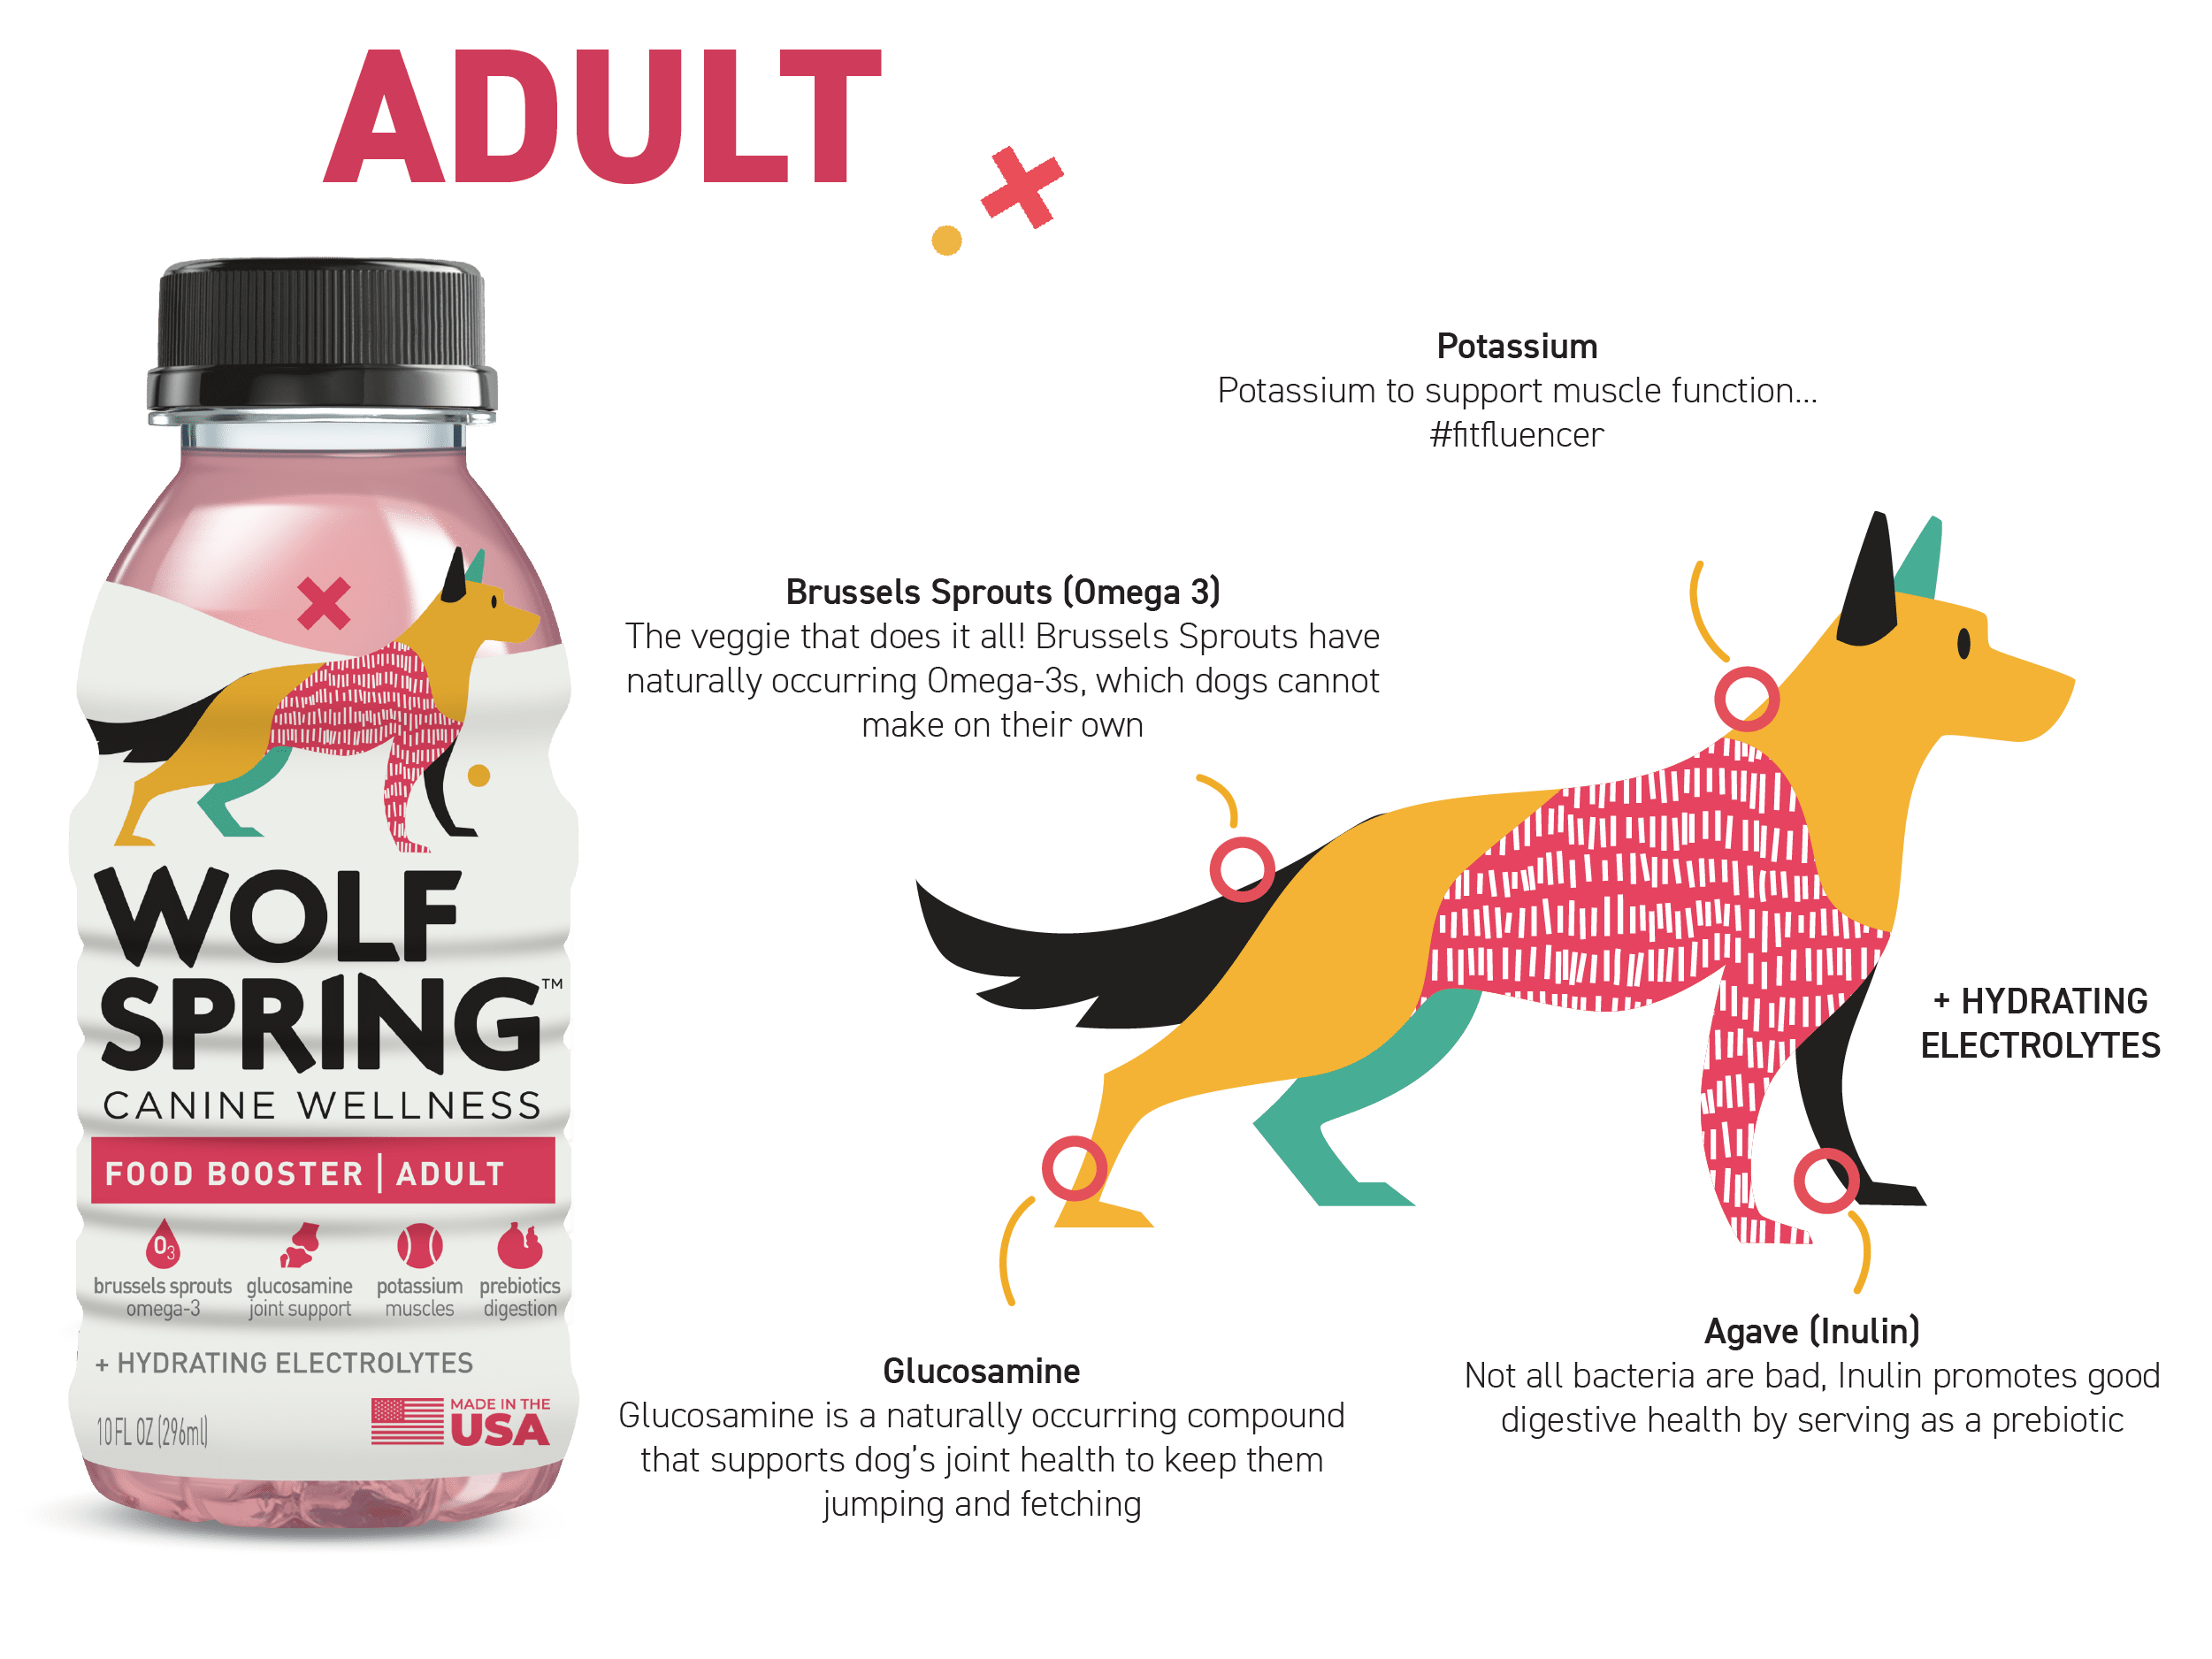 canine wellness - food booster - adult - wolf spring - canine nutritional supplement